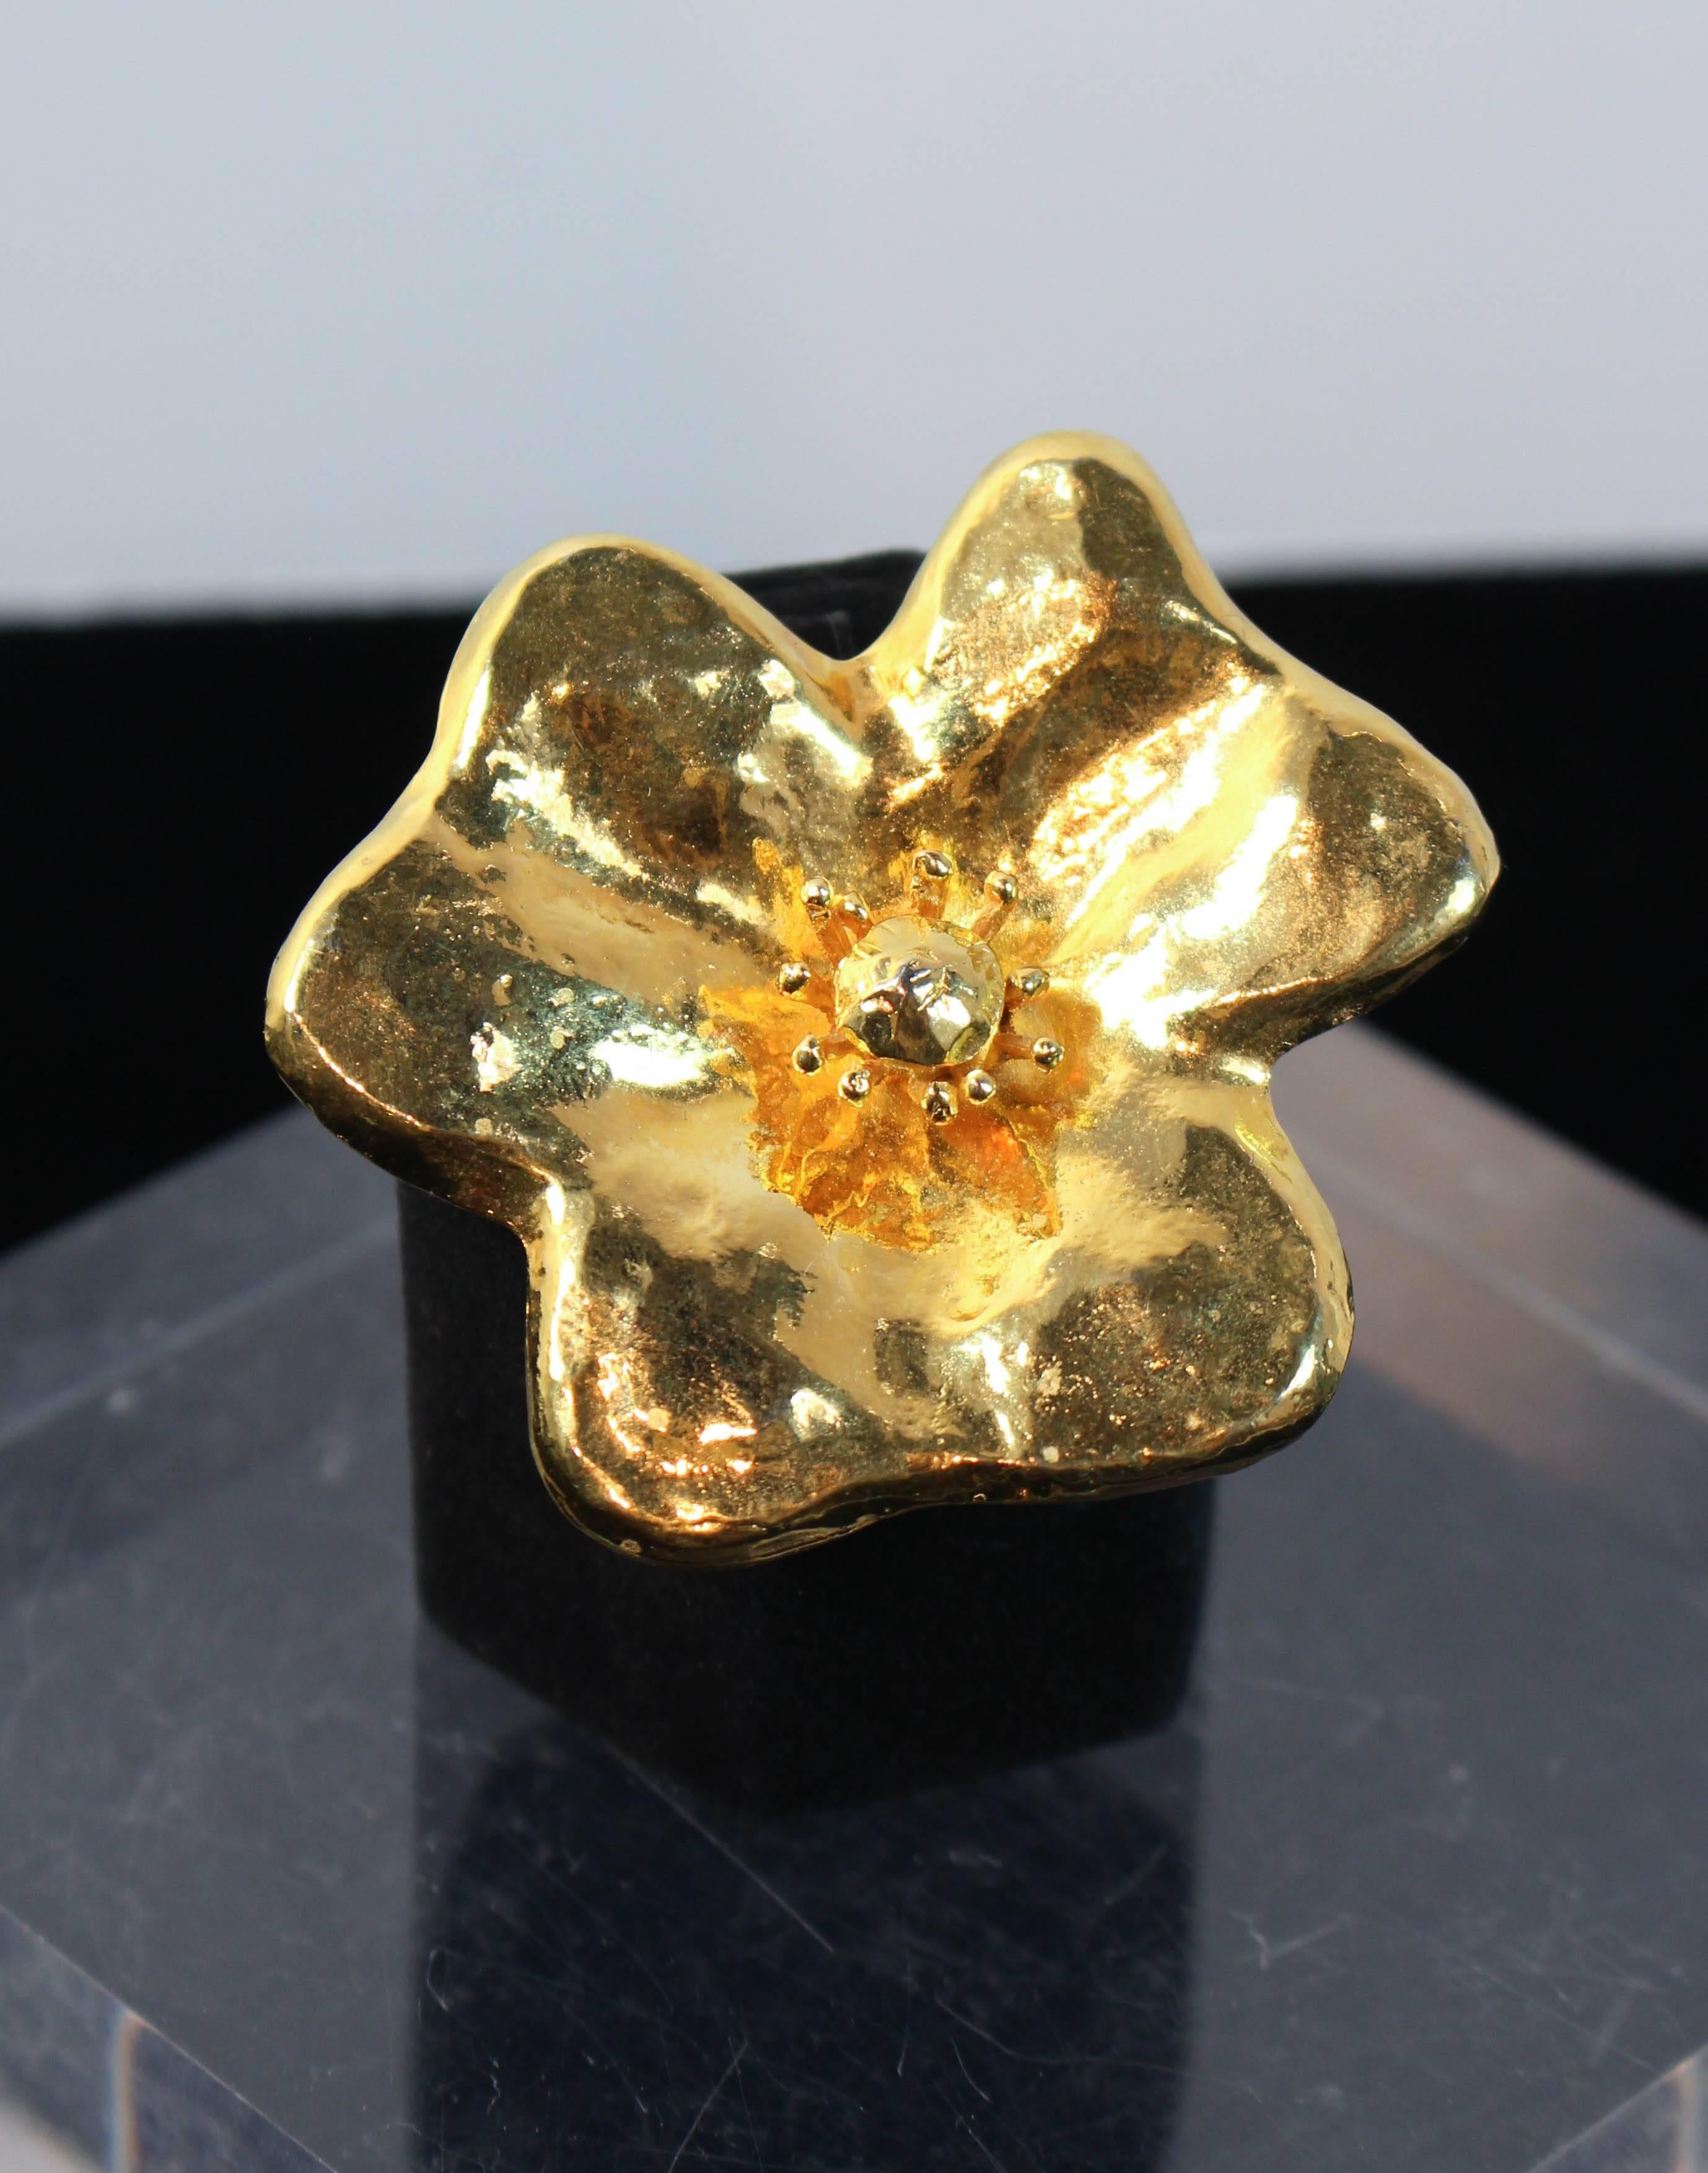 This Yves Saint Laurent Rive Gauche brooch is composed of a stunning gold tone metal. A lovely textured floral design. In excellent vintage condition.

**Please cross-reference measurements for personal accuracy. Size in description box is an